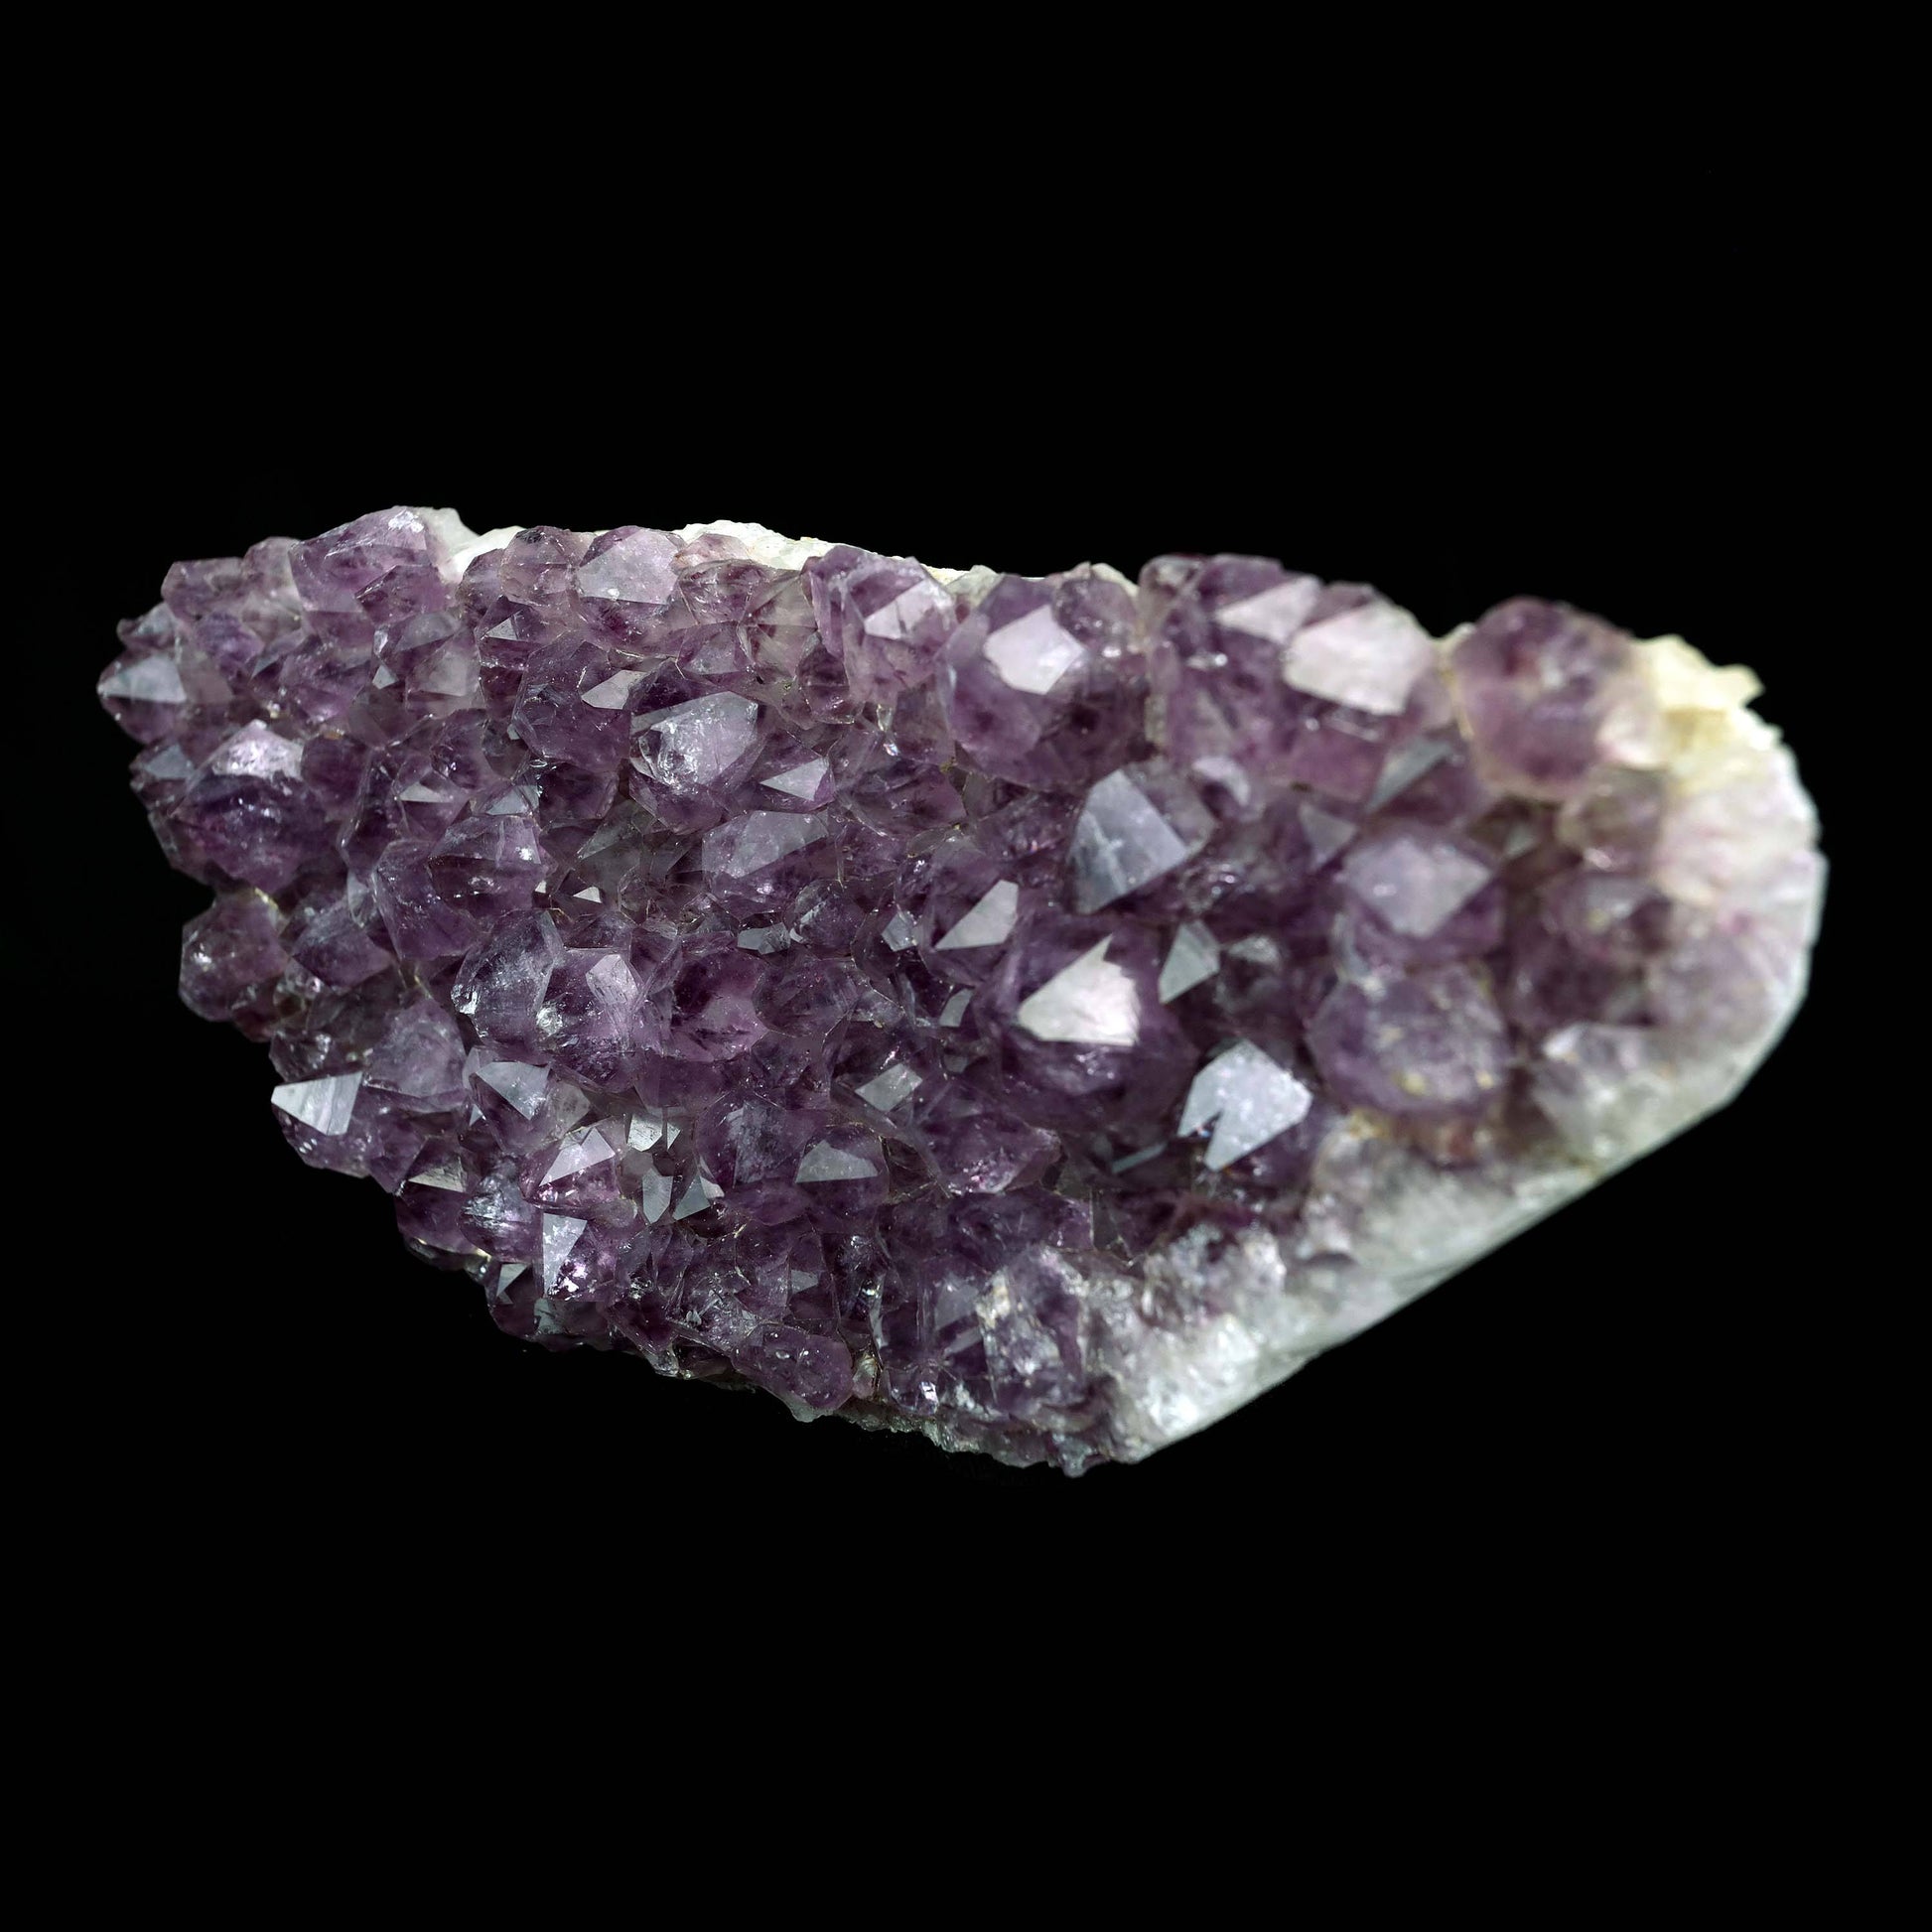 Purple Amethyst Plate Natural Mineral Specimen # B 4374  https://www.superbminerals.us/products/purple-amethyst-plate-natural-mineral-specimen-b-4374  Features:A very large plate of lustrous, large deep-purple Amethyst crystals with two clusters (one large and one smaller) of highly translucent, colorless, intergrown parallel “nailhead spar” crystals emanating from the center of the plate of Amethyst. It is incredible! Amazing color, luster, symmetry and crystal 